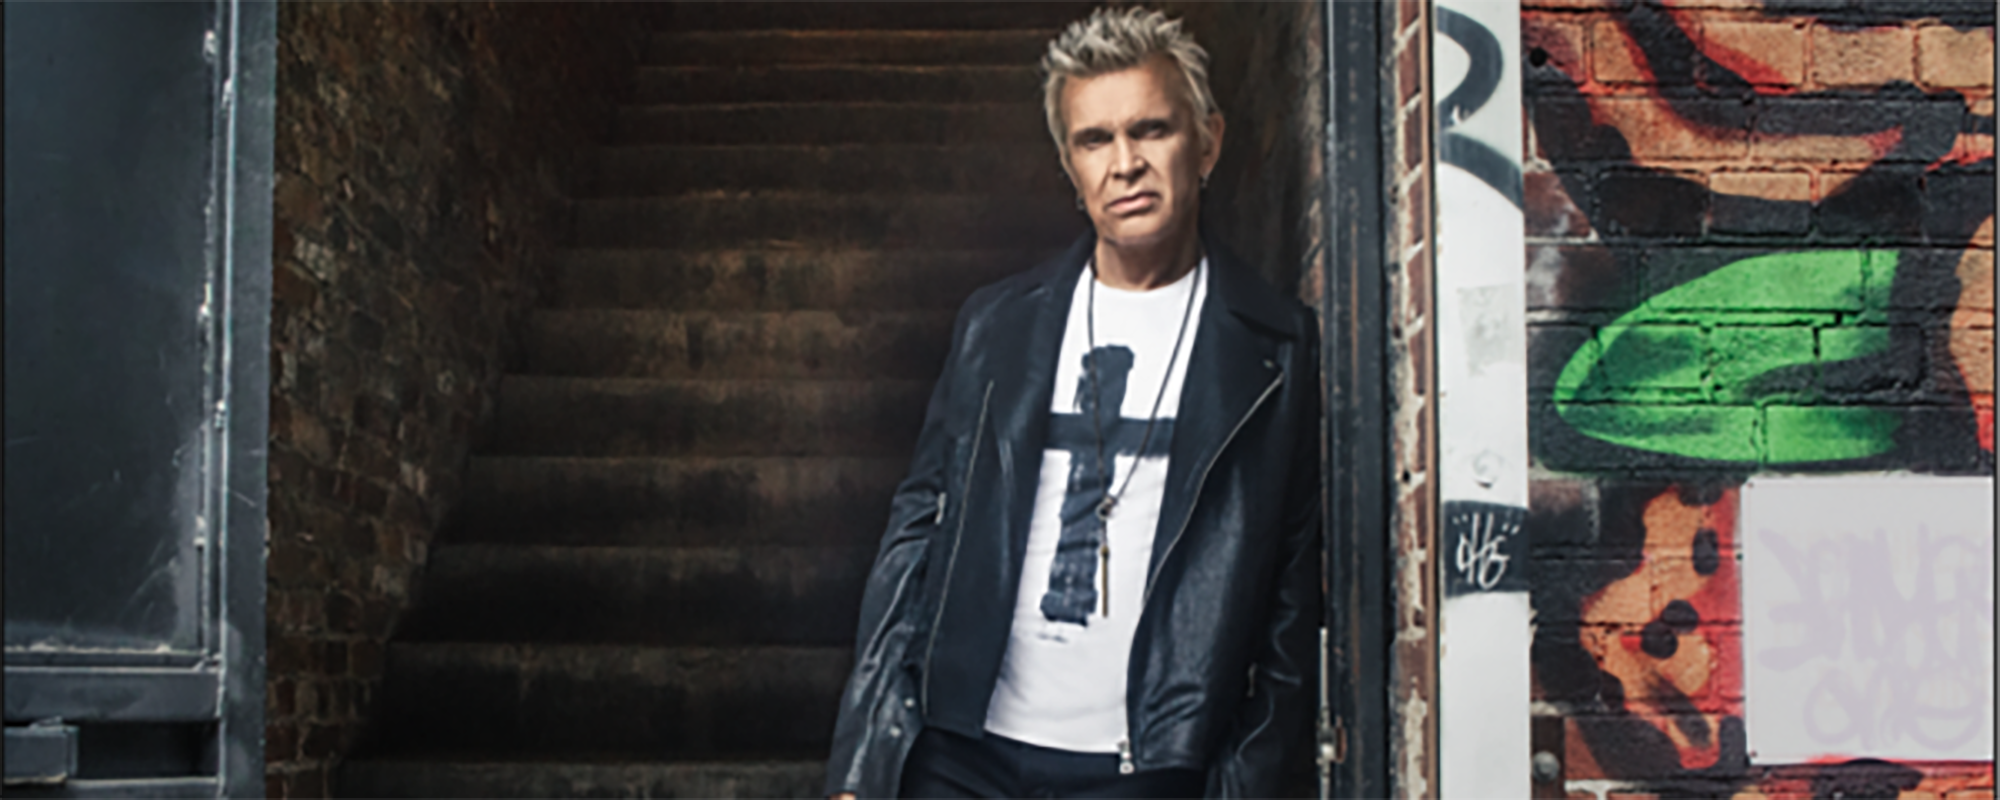 Billy Idol Announces North American Tour